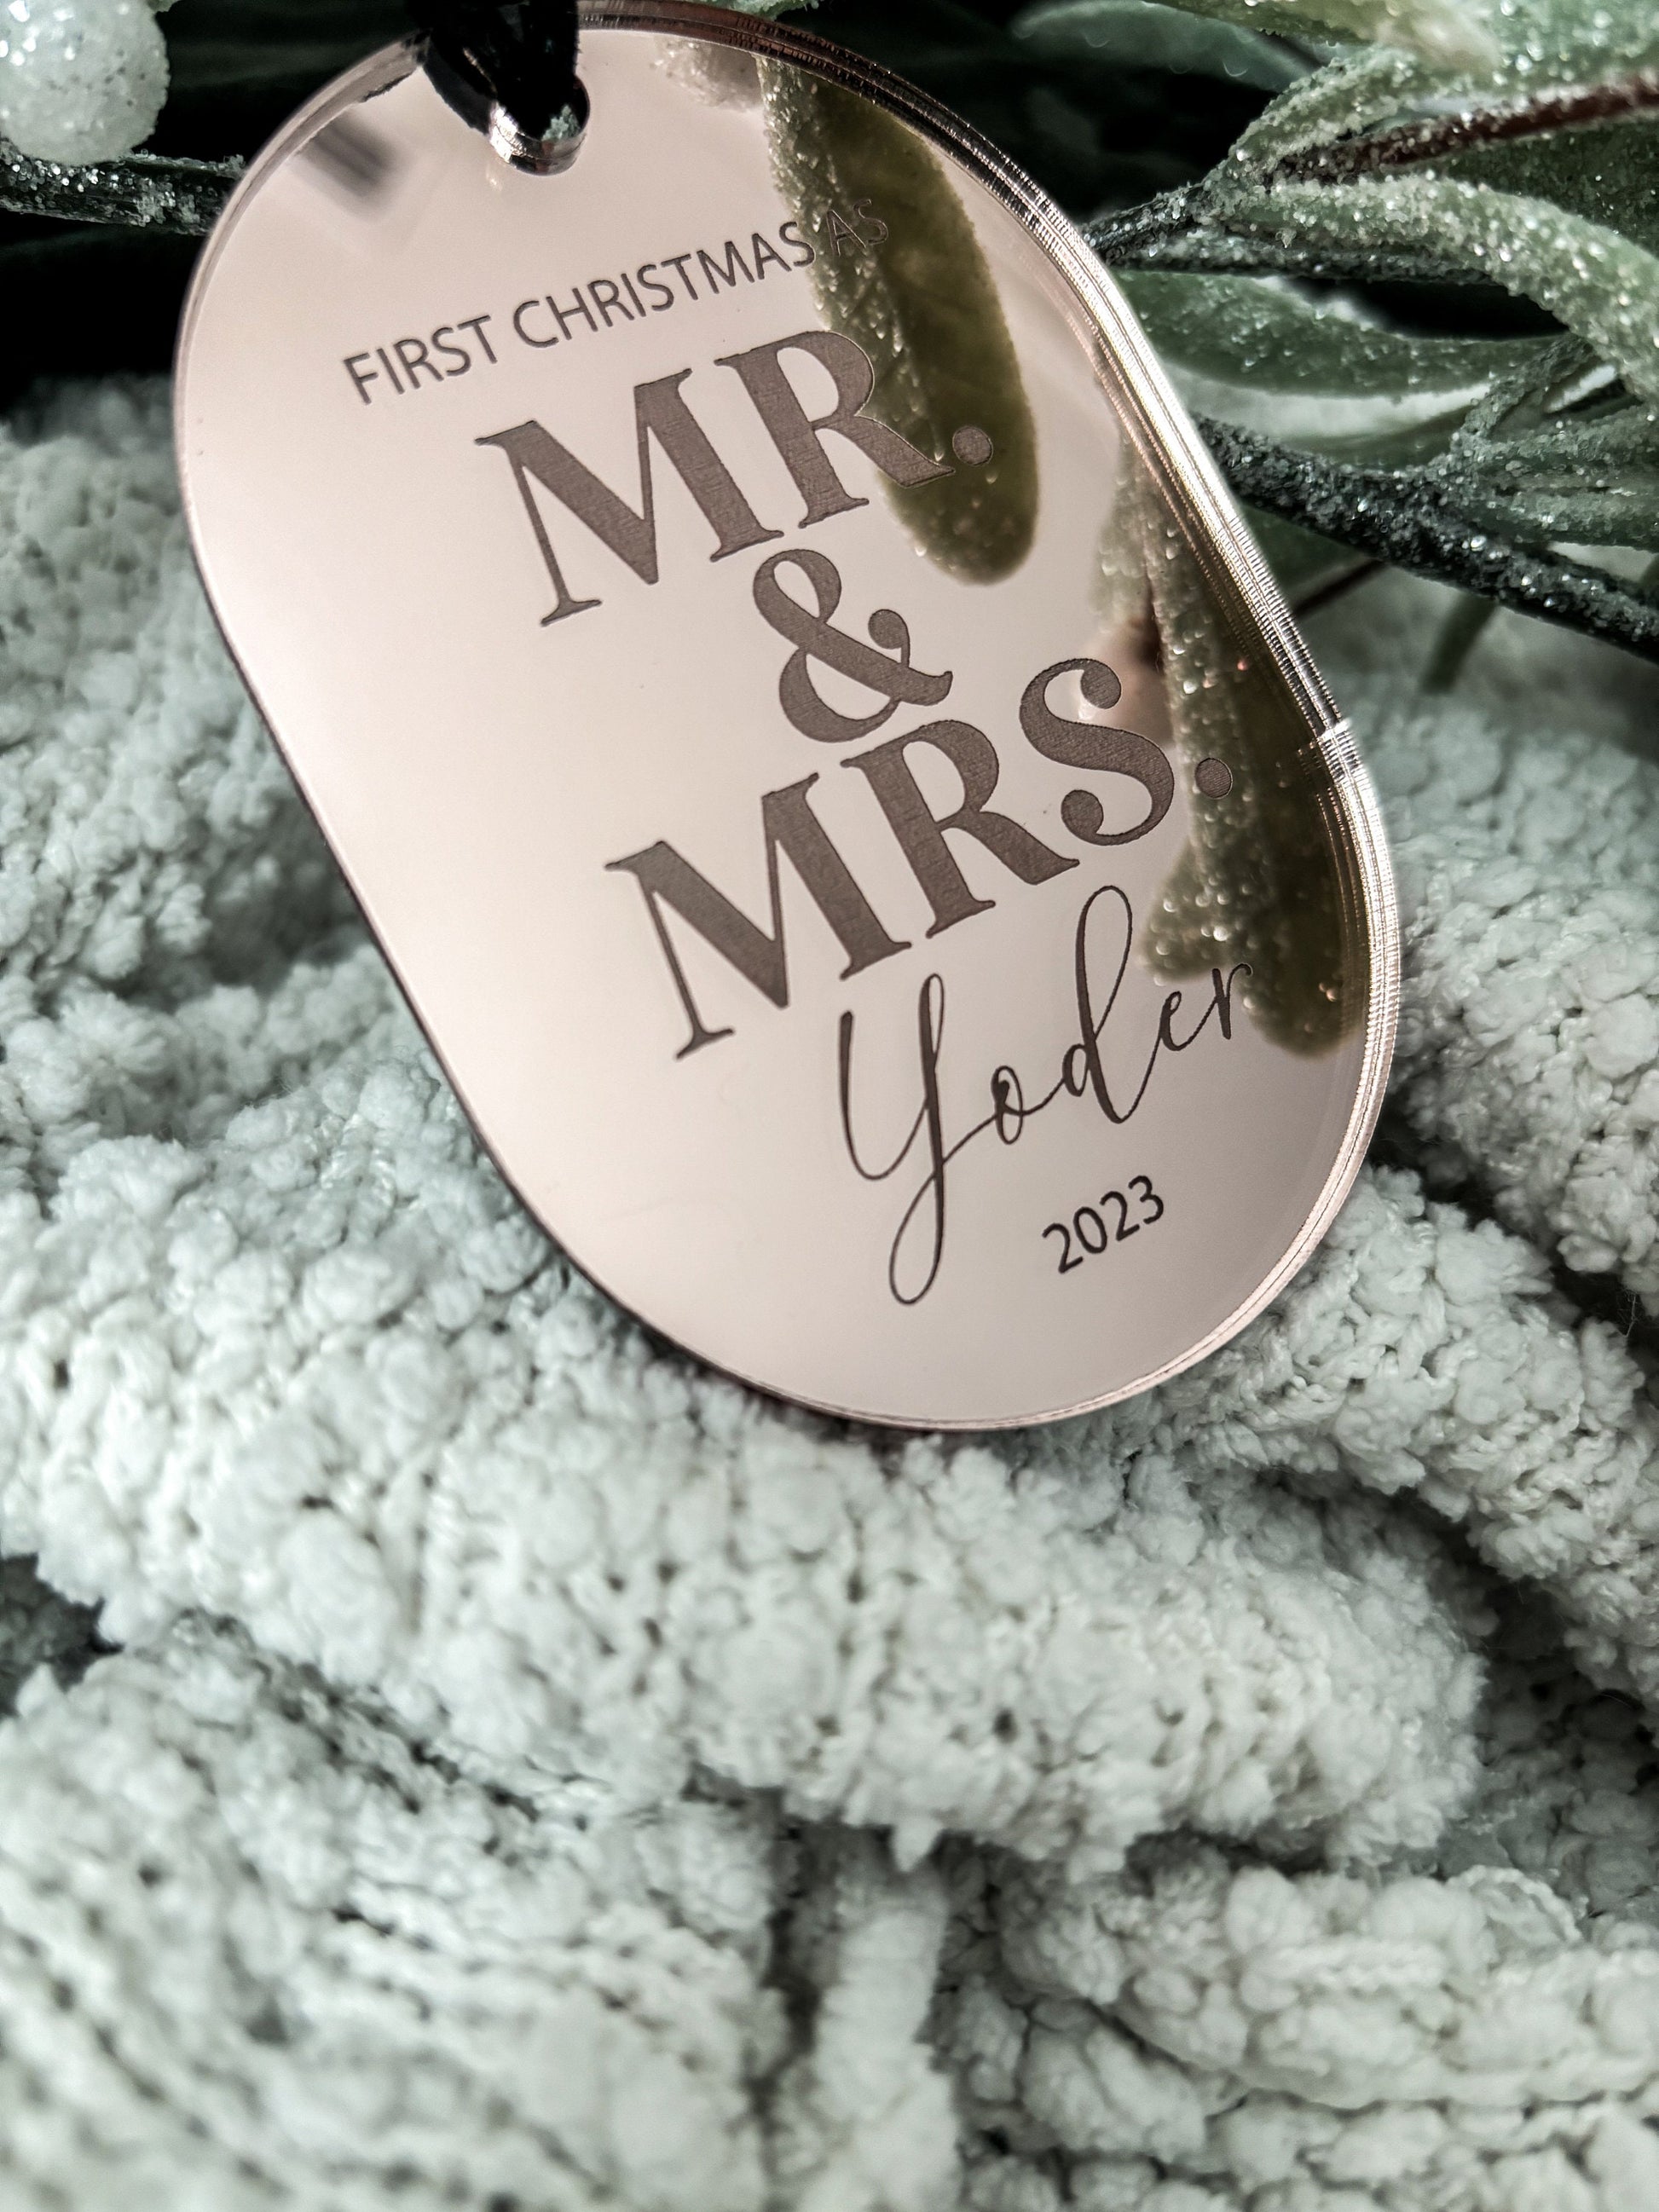 Our First Christmas as Mr. & Mrs. Acrylic Ornament, Custom Newlyweds Ornament, Just Married, Anniversary Ornament, Newlywed Gift